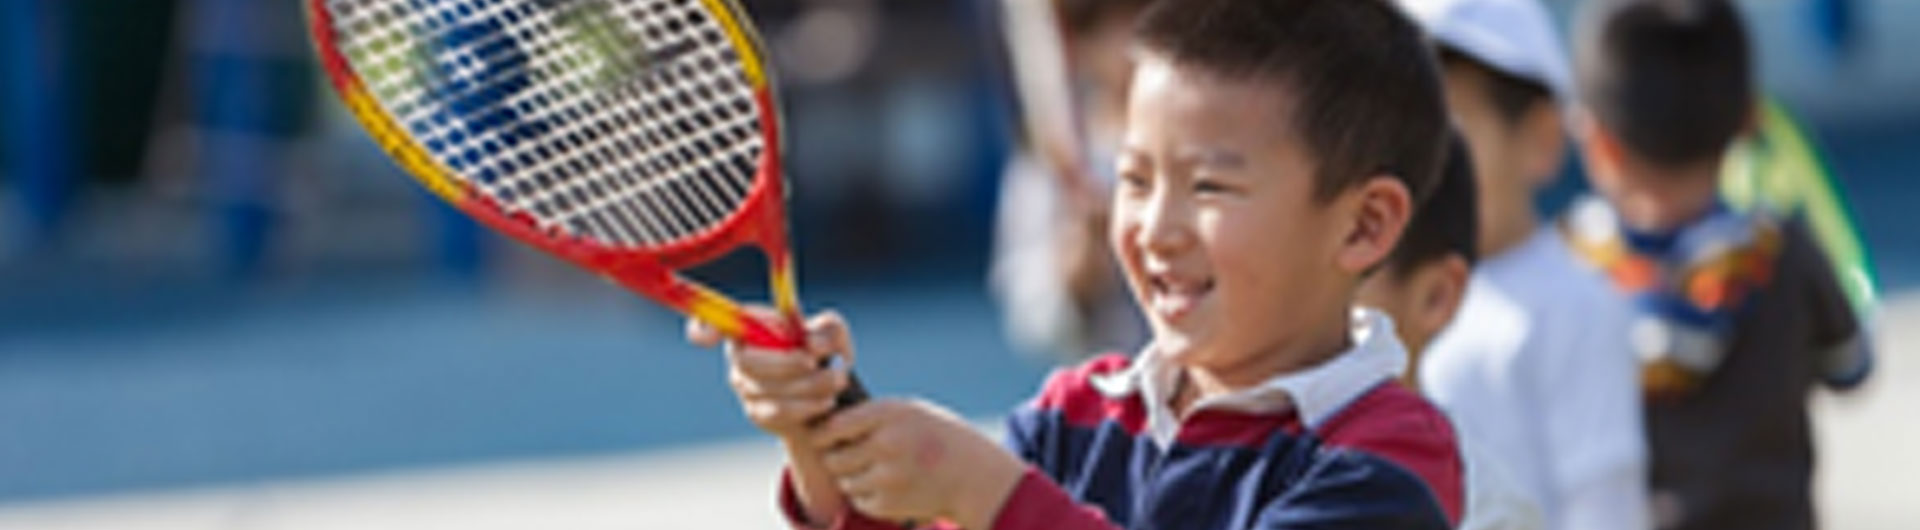 A child holding a racket, cropped